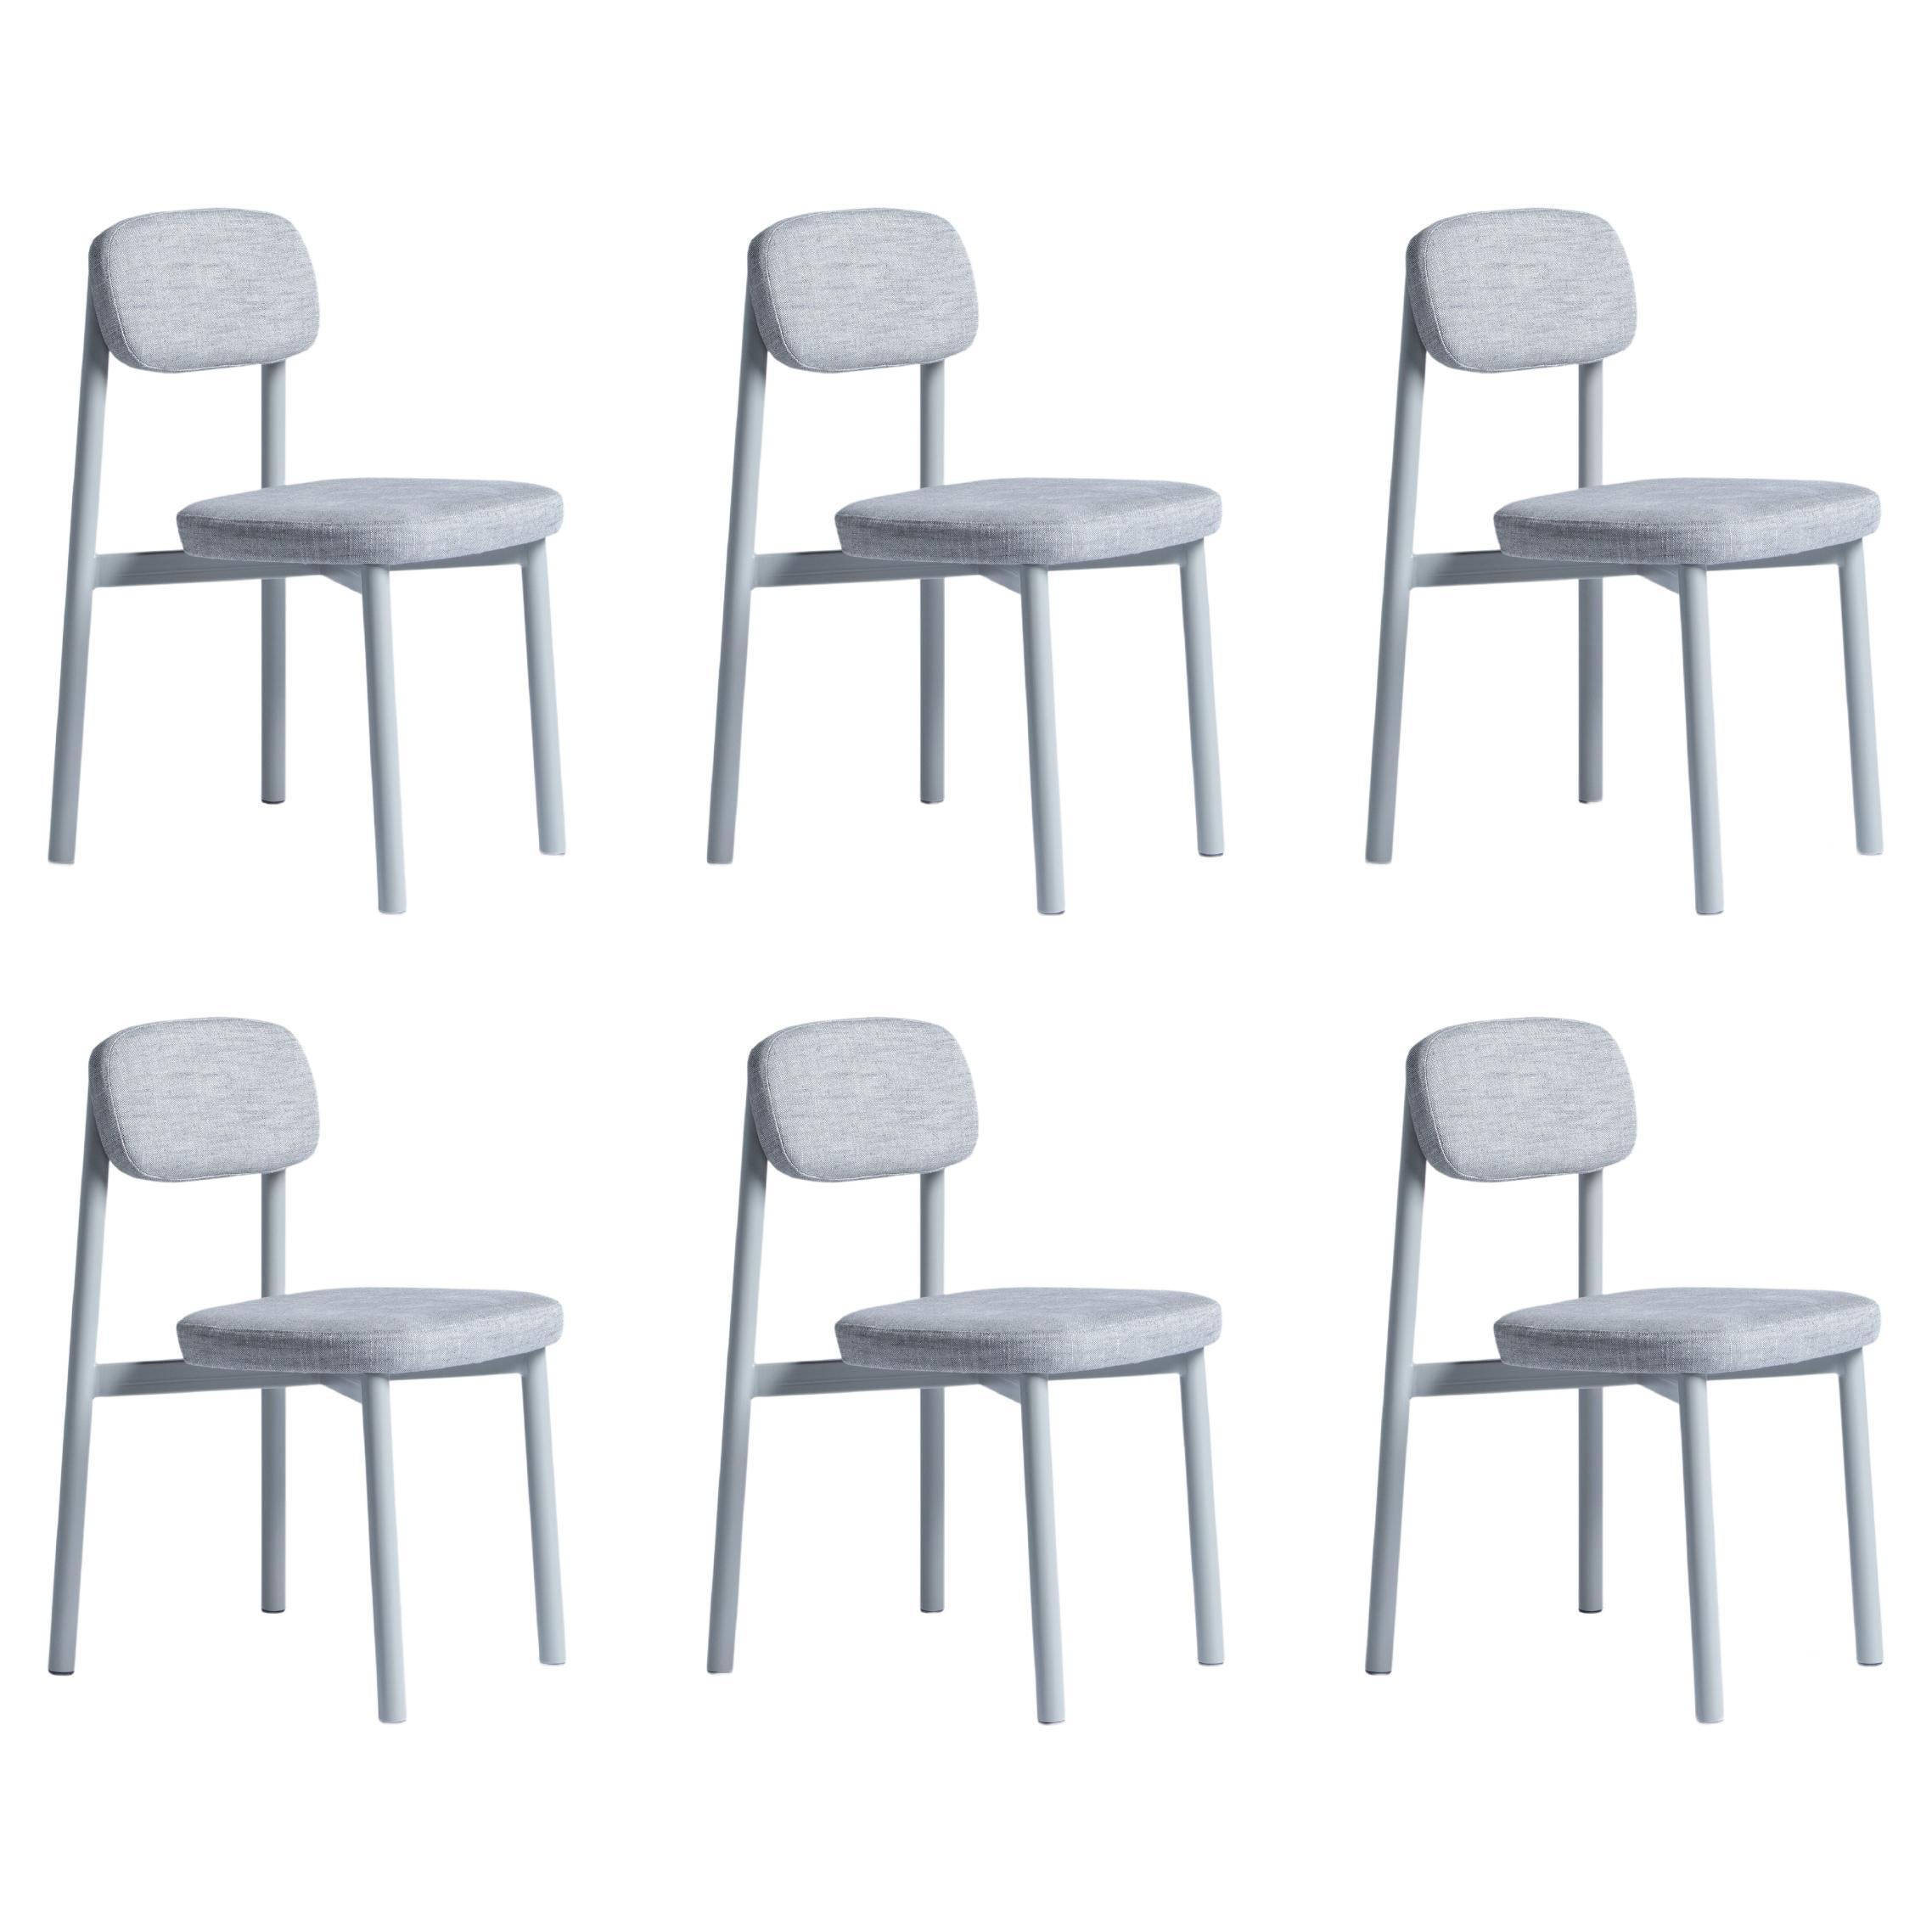 Set of 6 Grey Residence Chairs by Kann Design For Sale